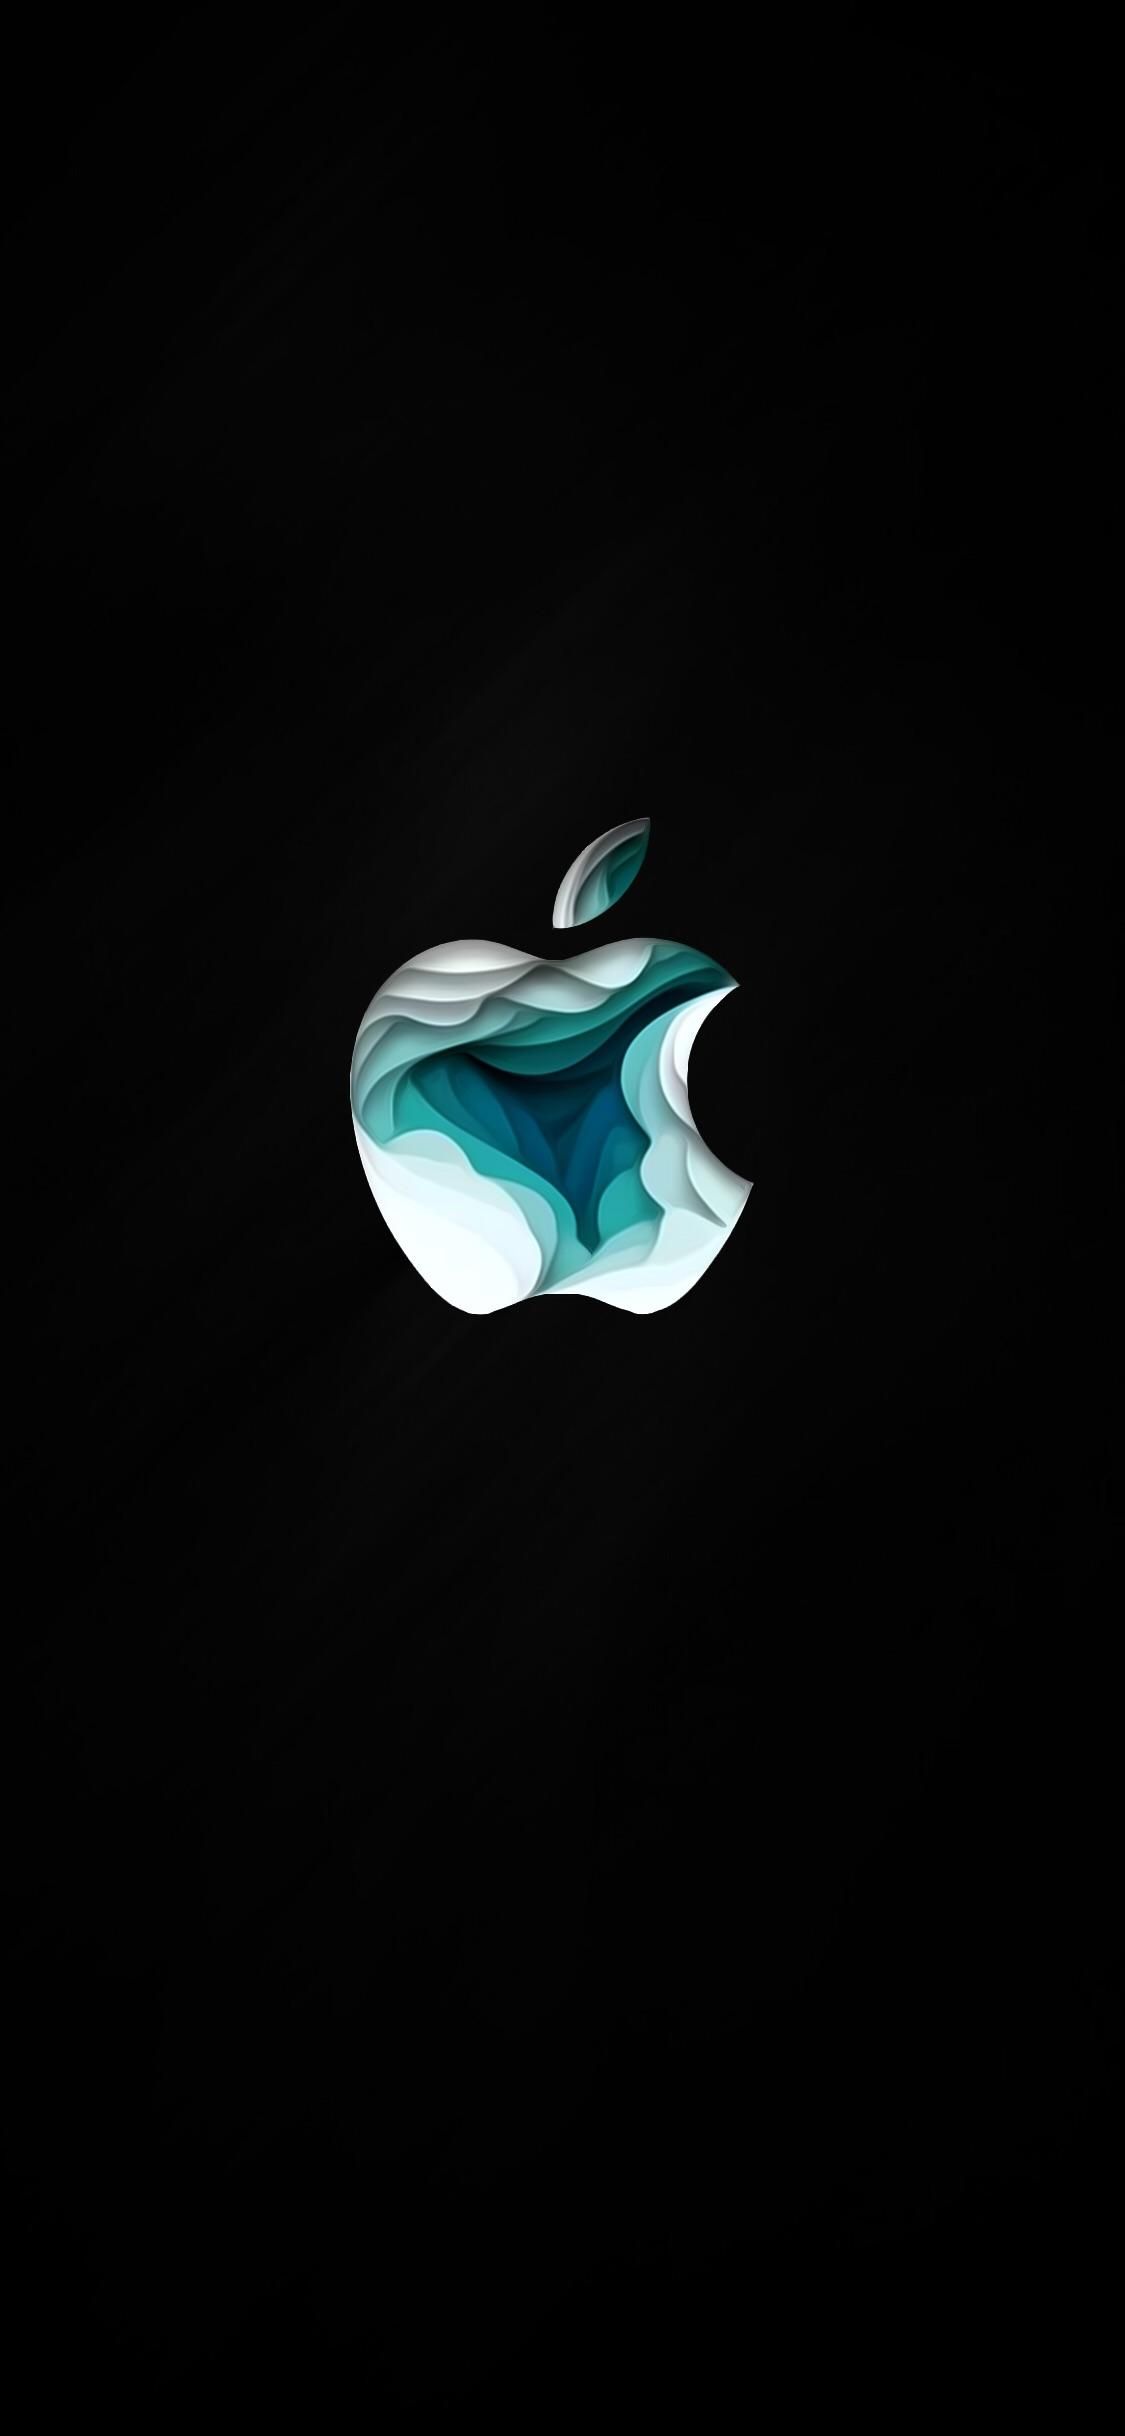 Apple Logo iPhone 11 Pro Max Wallpapers - Wallpaper Cave